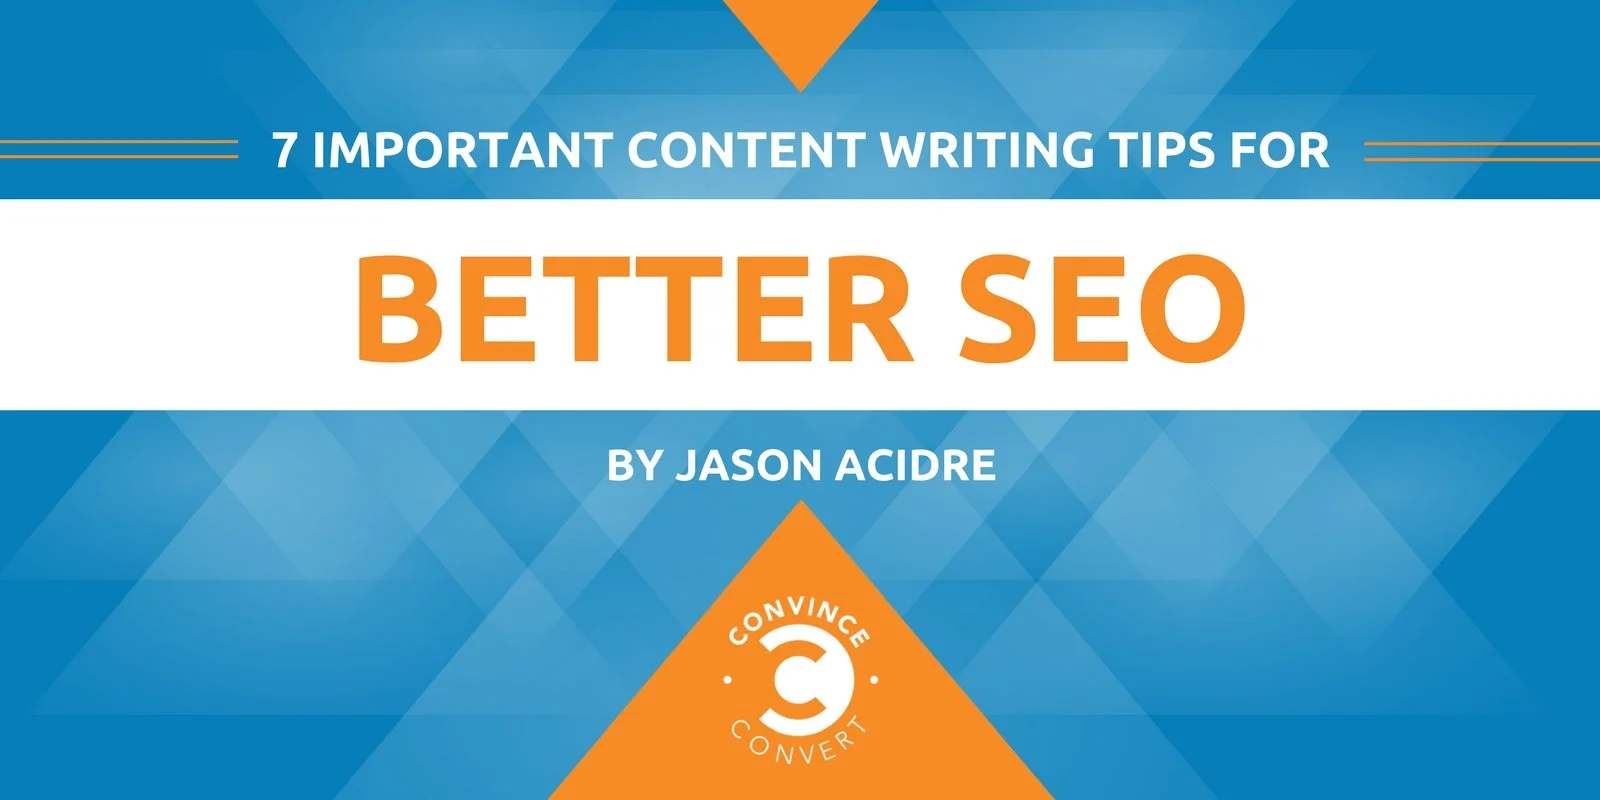 4 SEO Content Writing Tips That Everyone Must Know